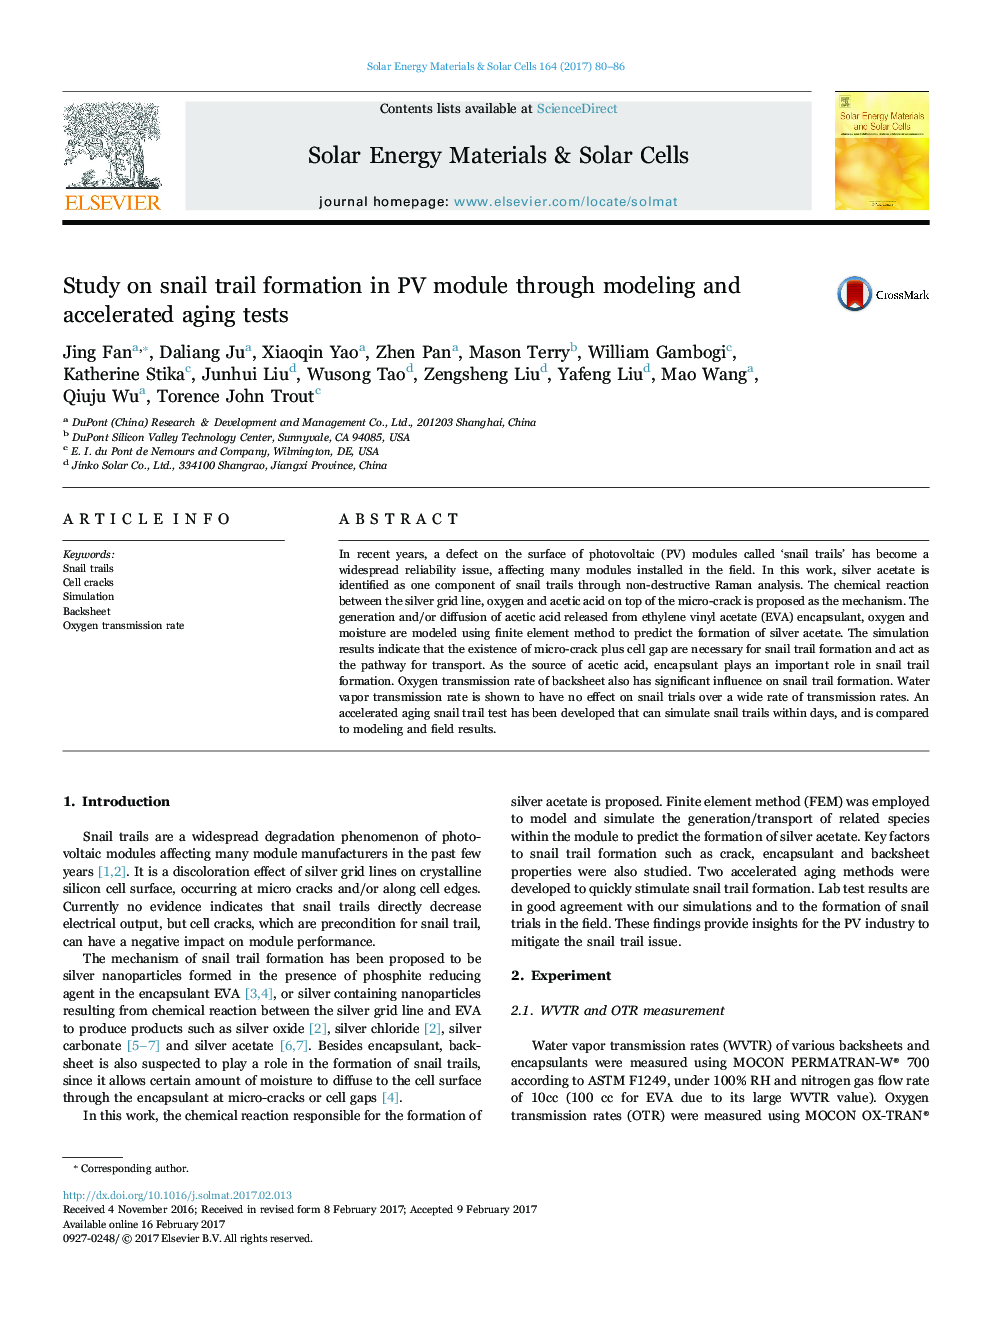 Study on snail trail formation in PV module through modeling and accelerated aging tests